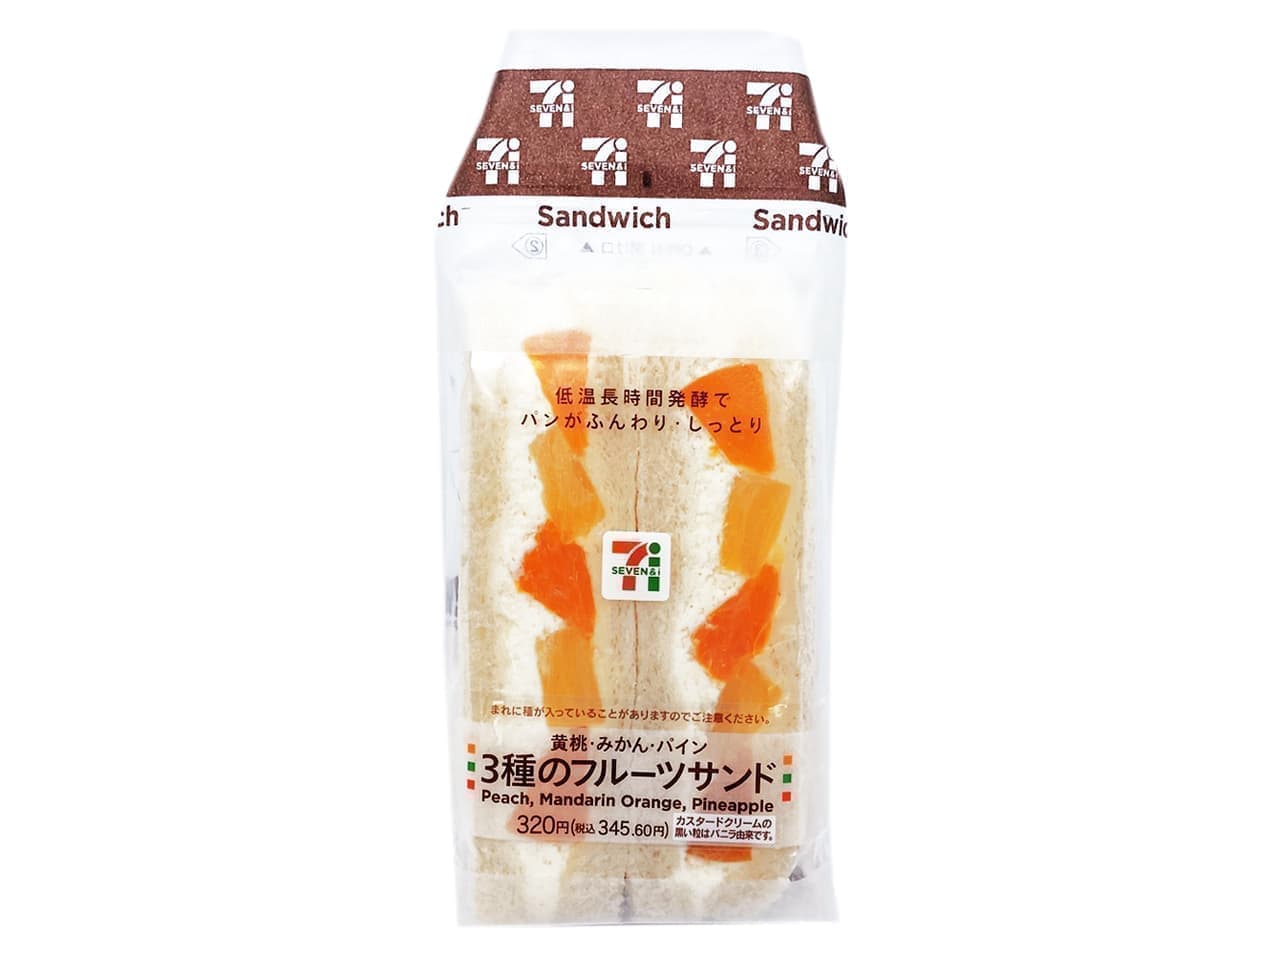 7-ELEVEN "Three Kinds of Fruit Sandwiches